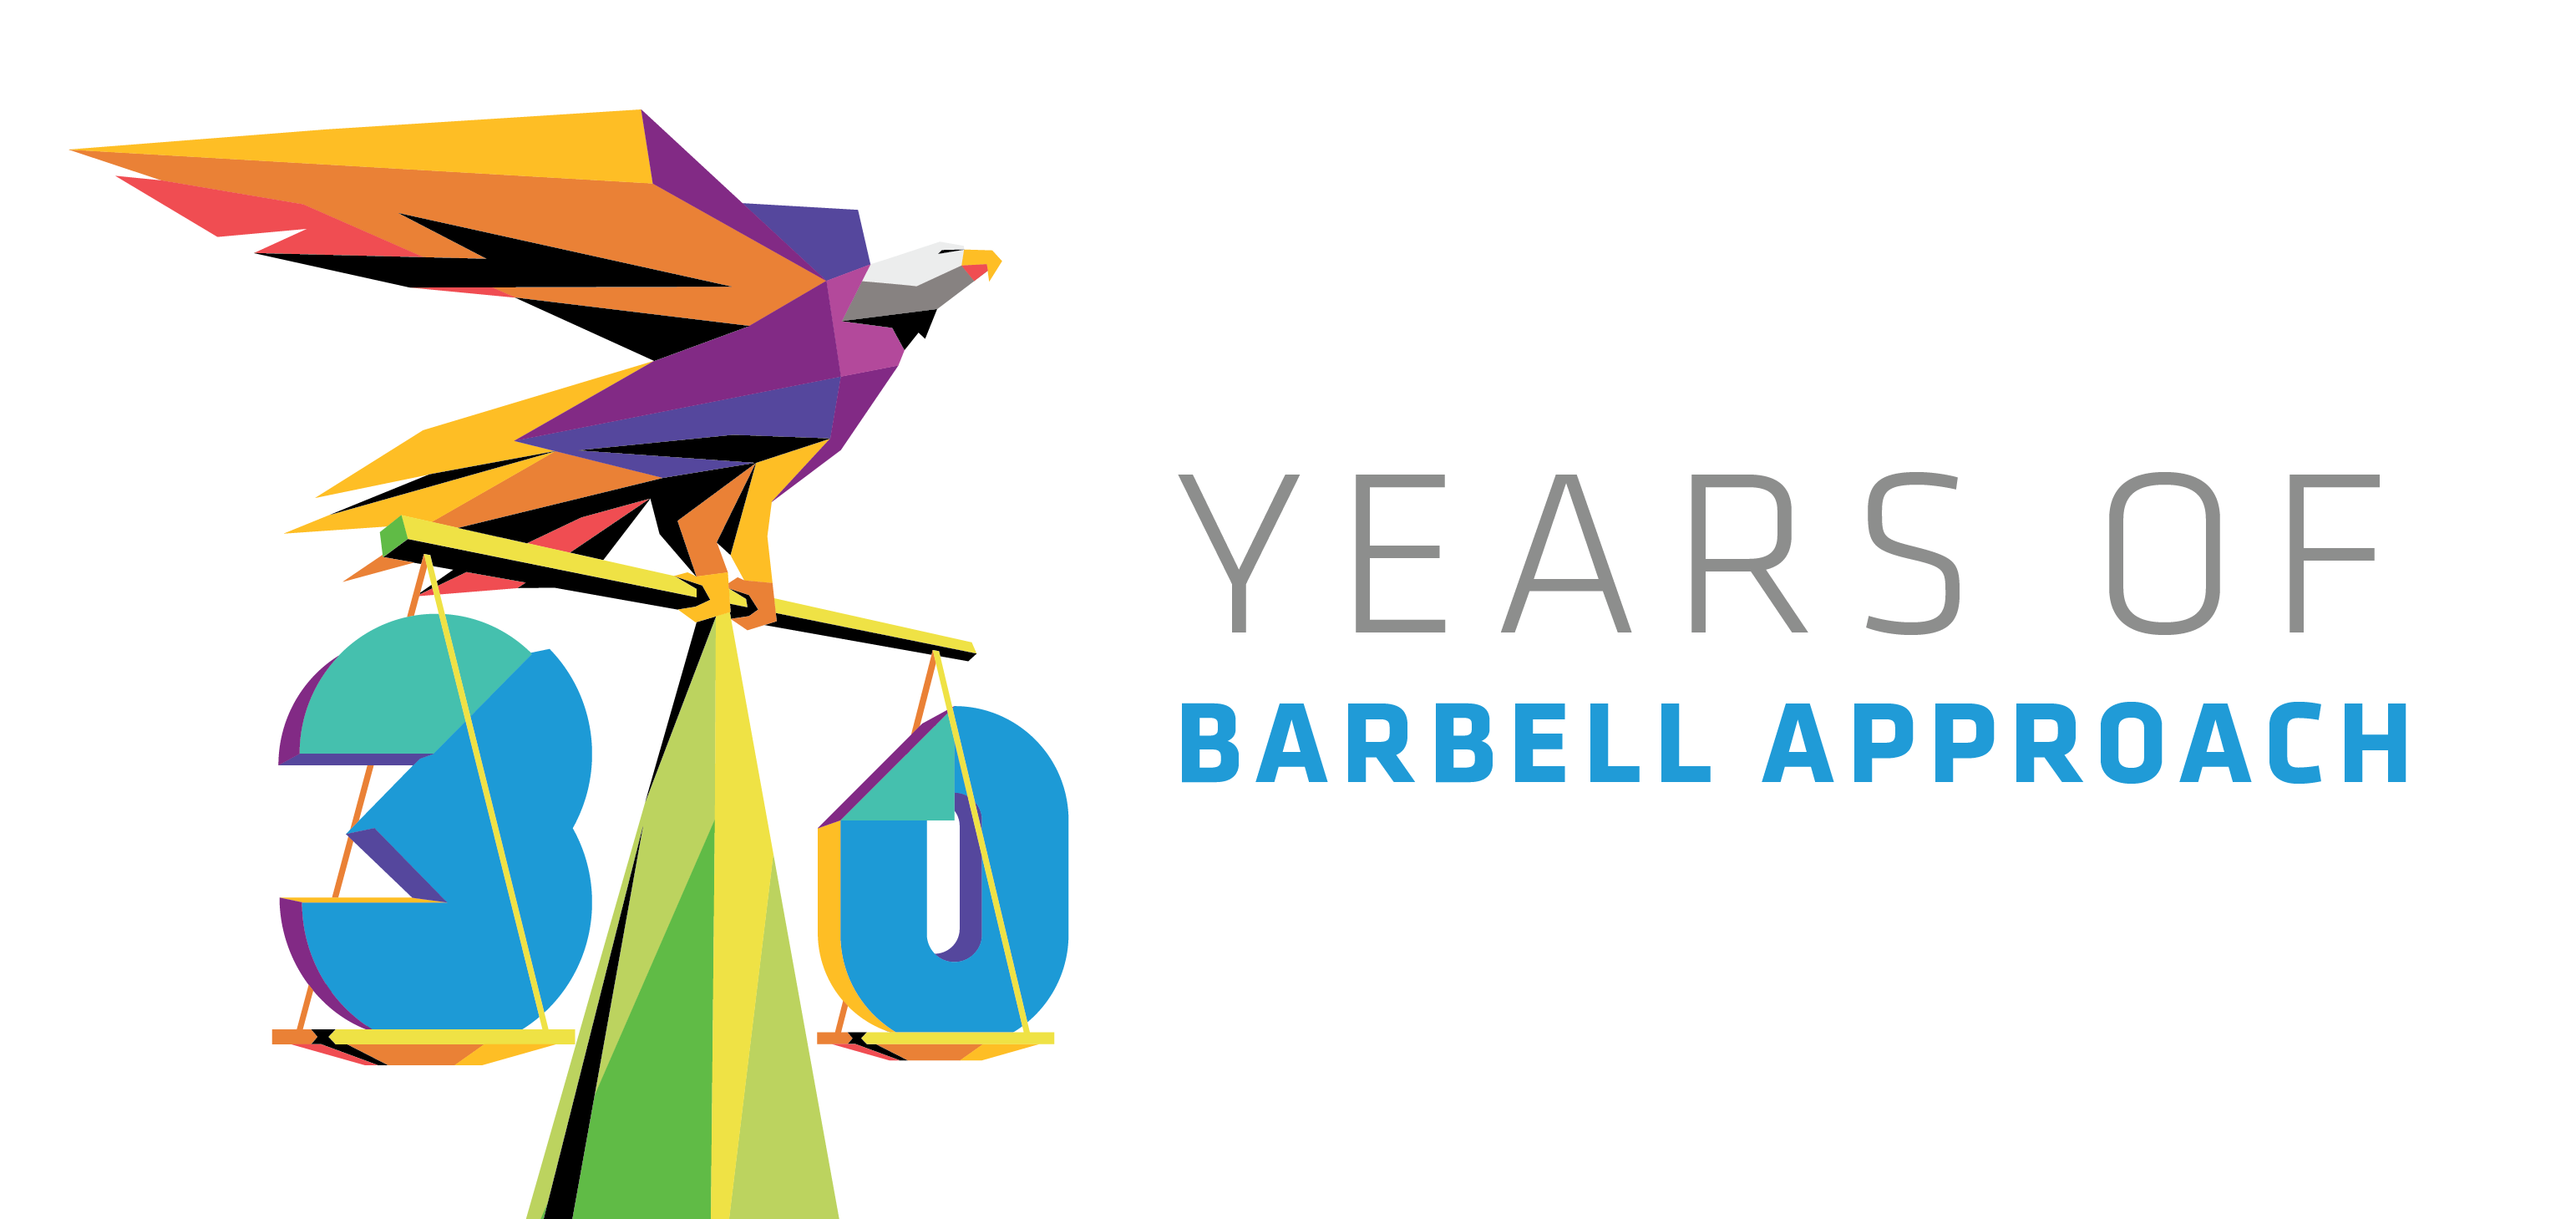 30 Years of Barbell Approach